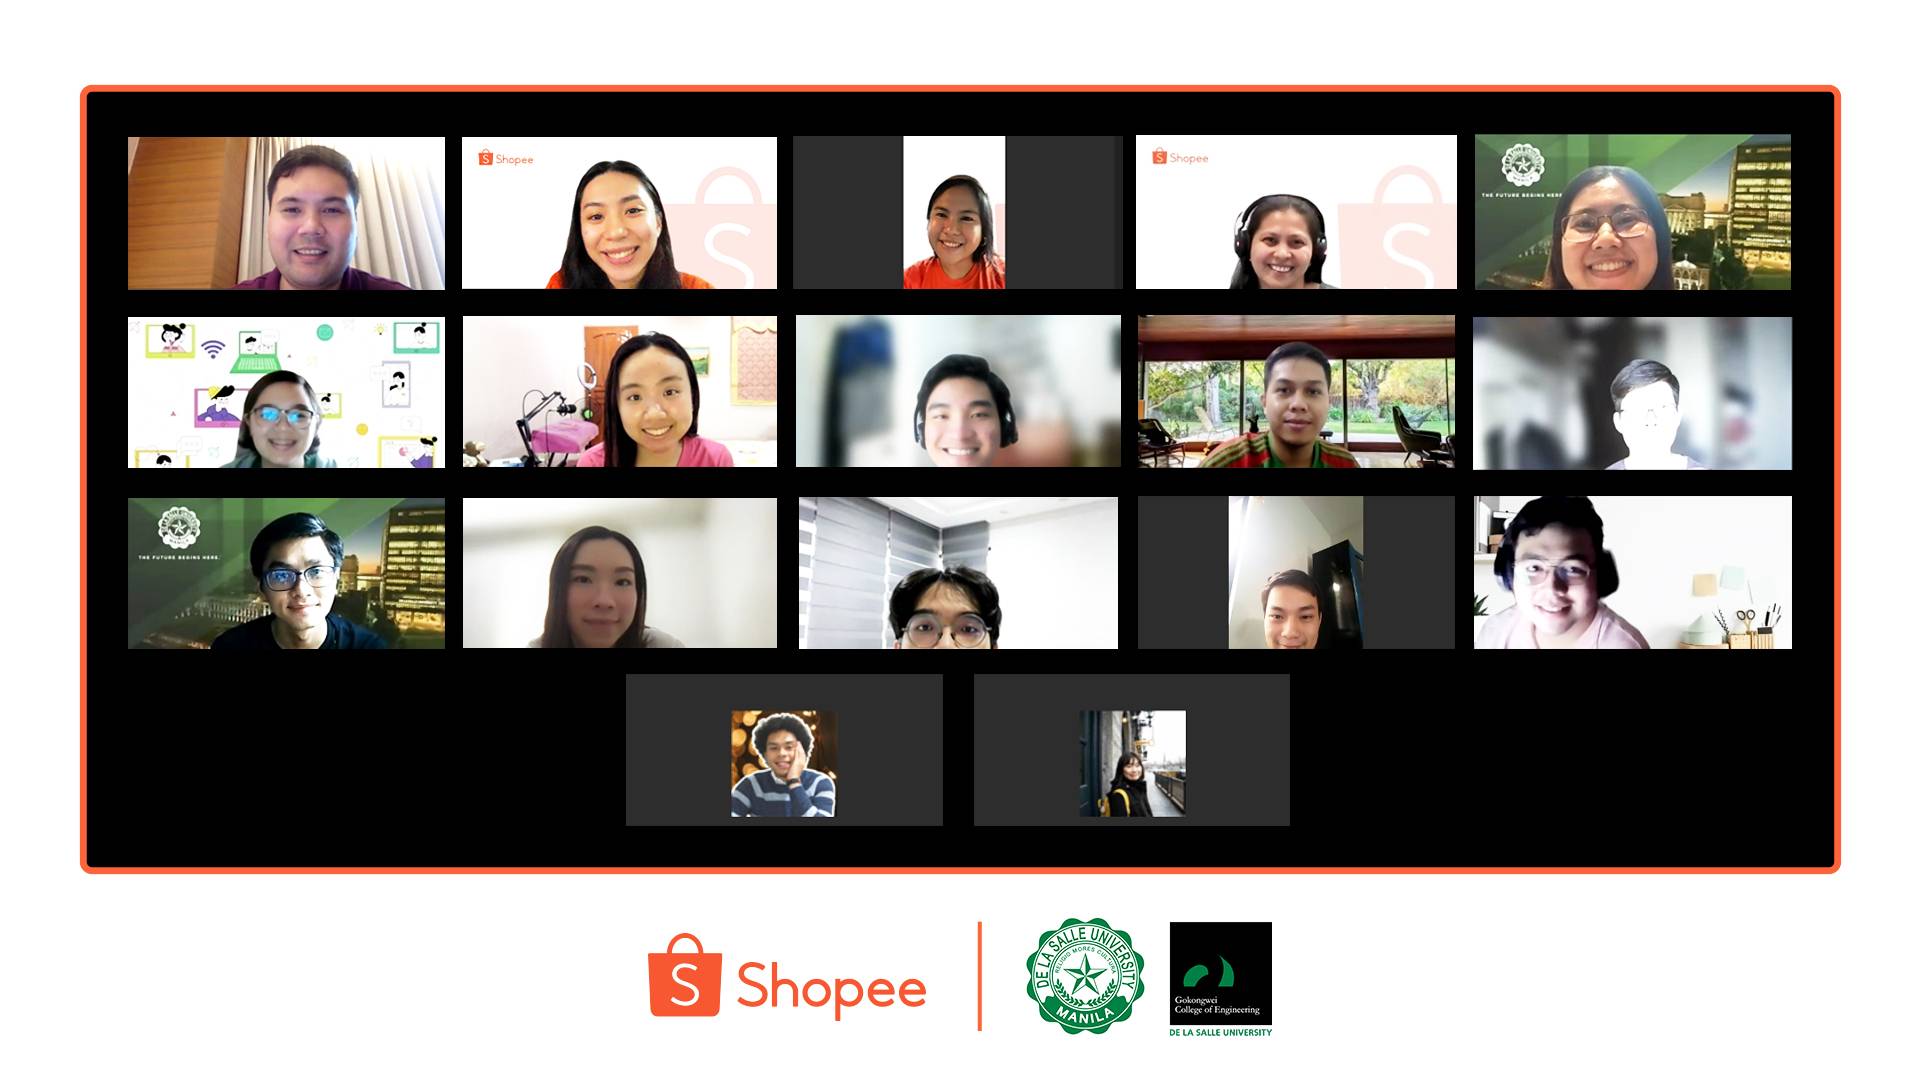 Shopee and De La Salle University Team Up to Educate Future Tech Talents on the E-commerce Industry